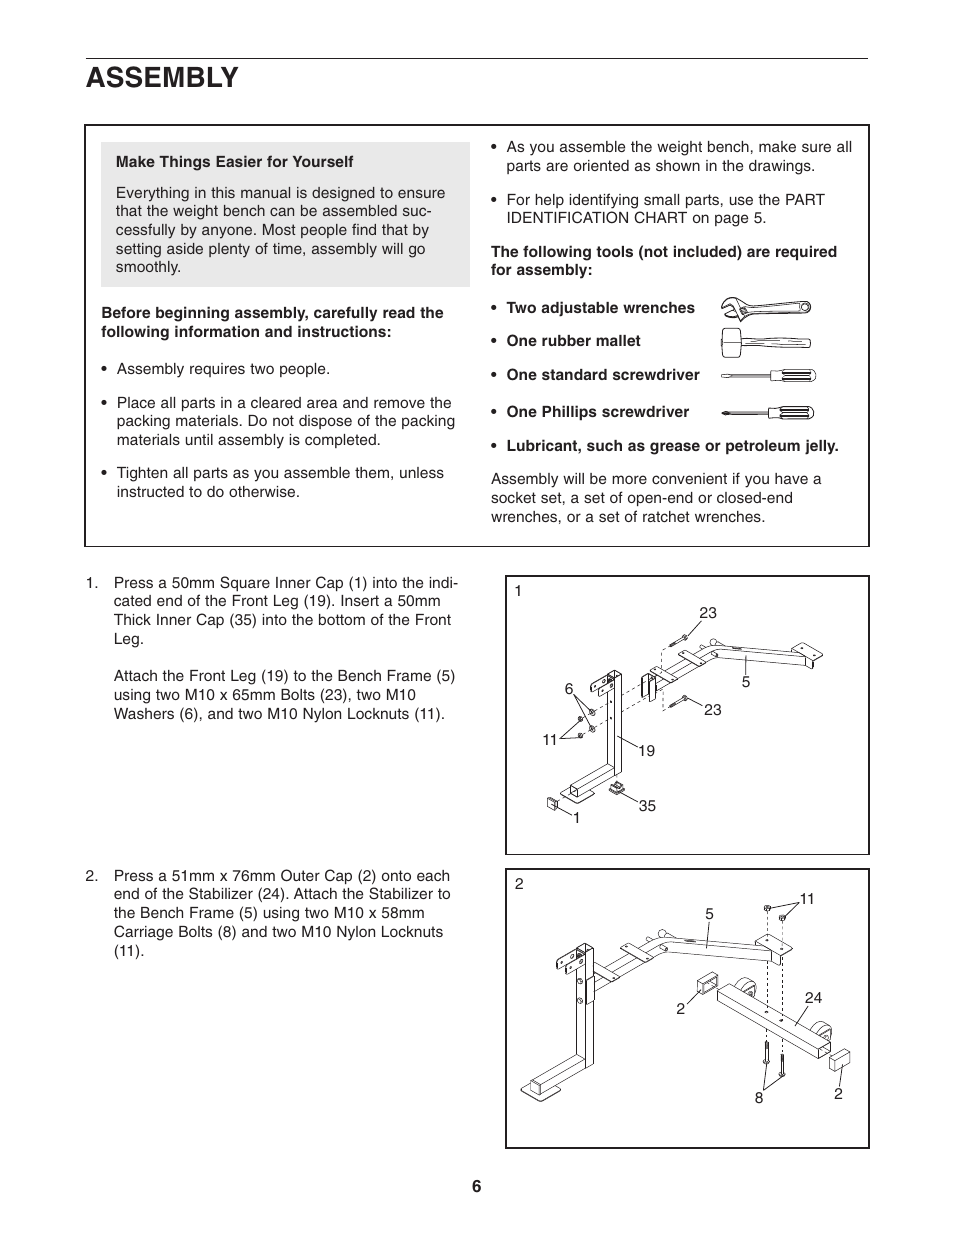 Assembly | Weider Pro XT20 WEBE09101 User Manual | Page 6 / 16